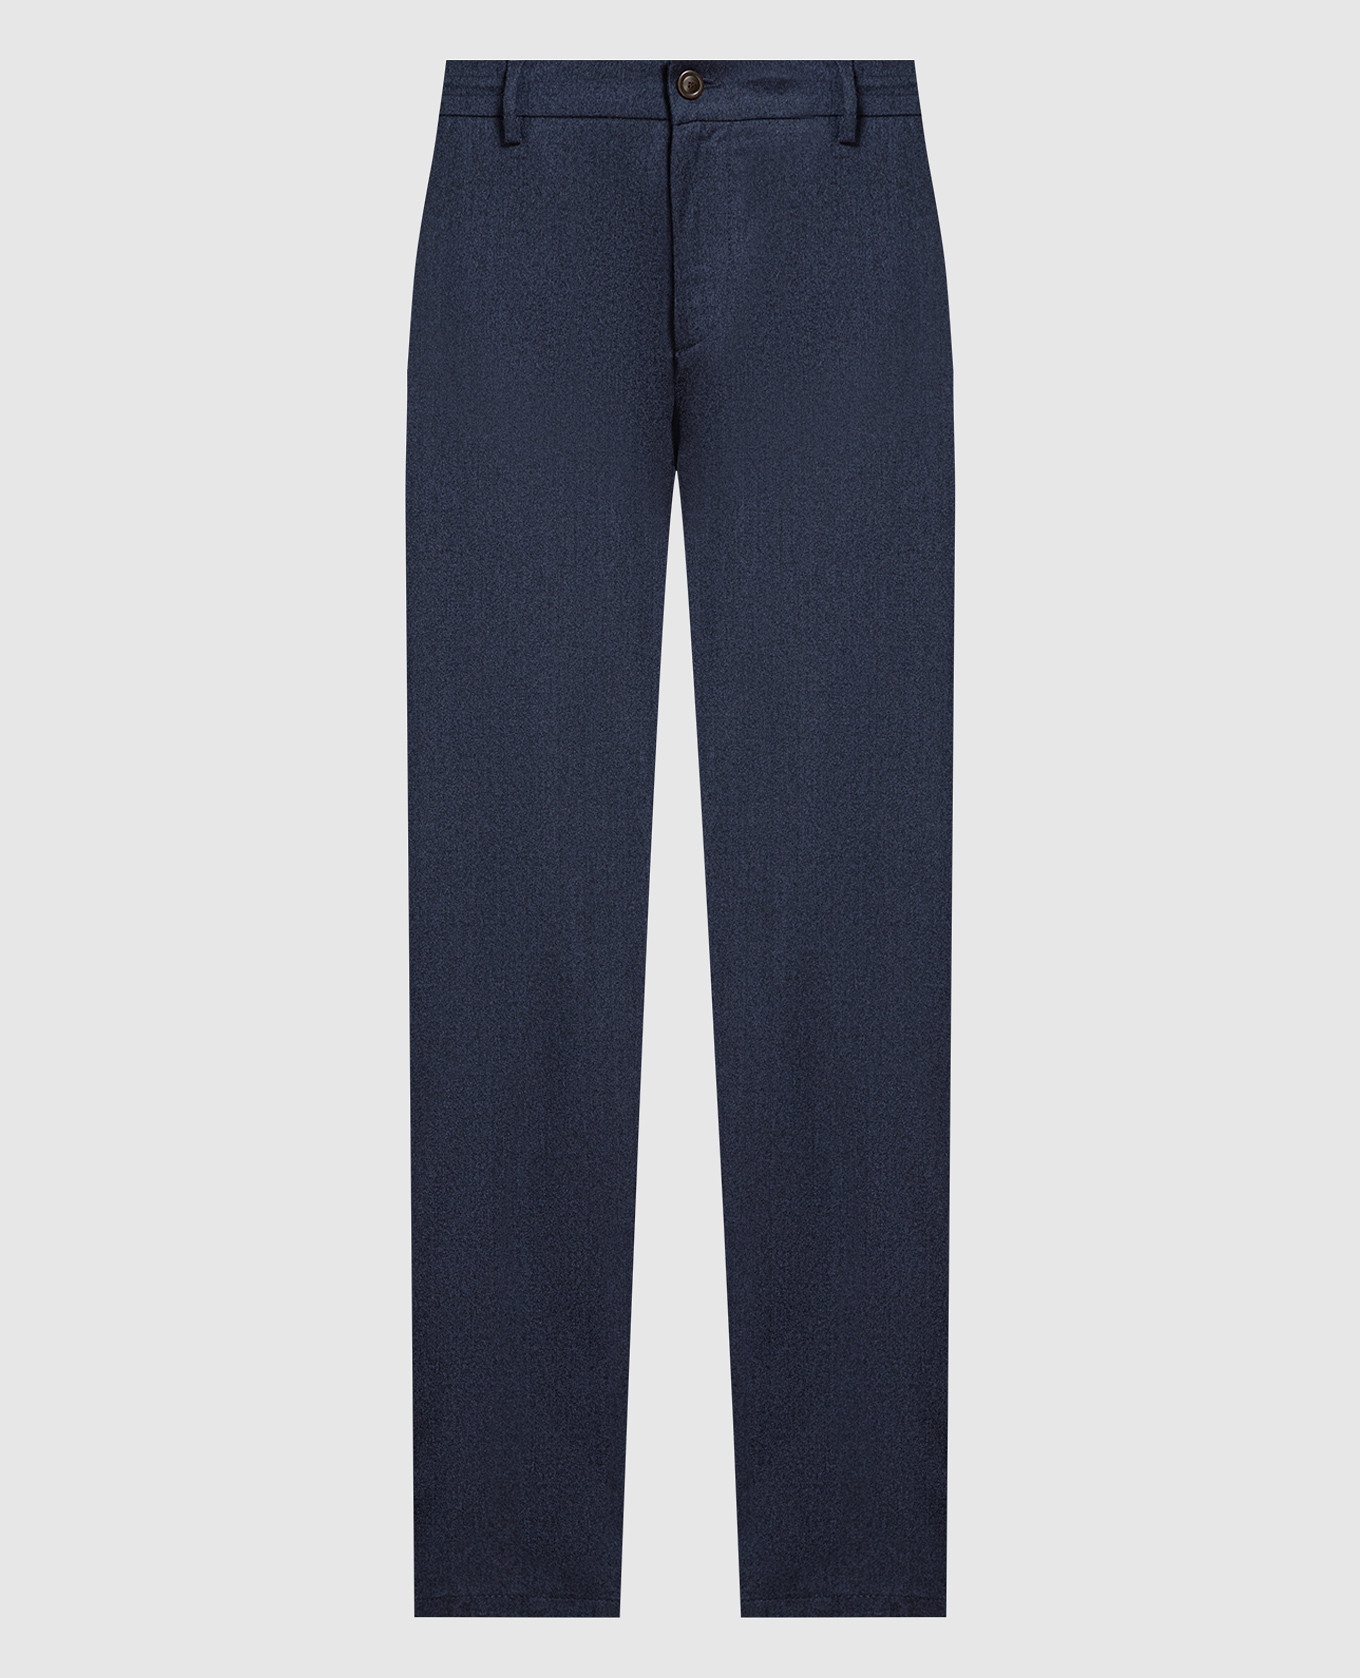 Blue pants made of wool